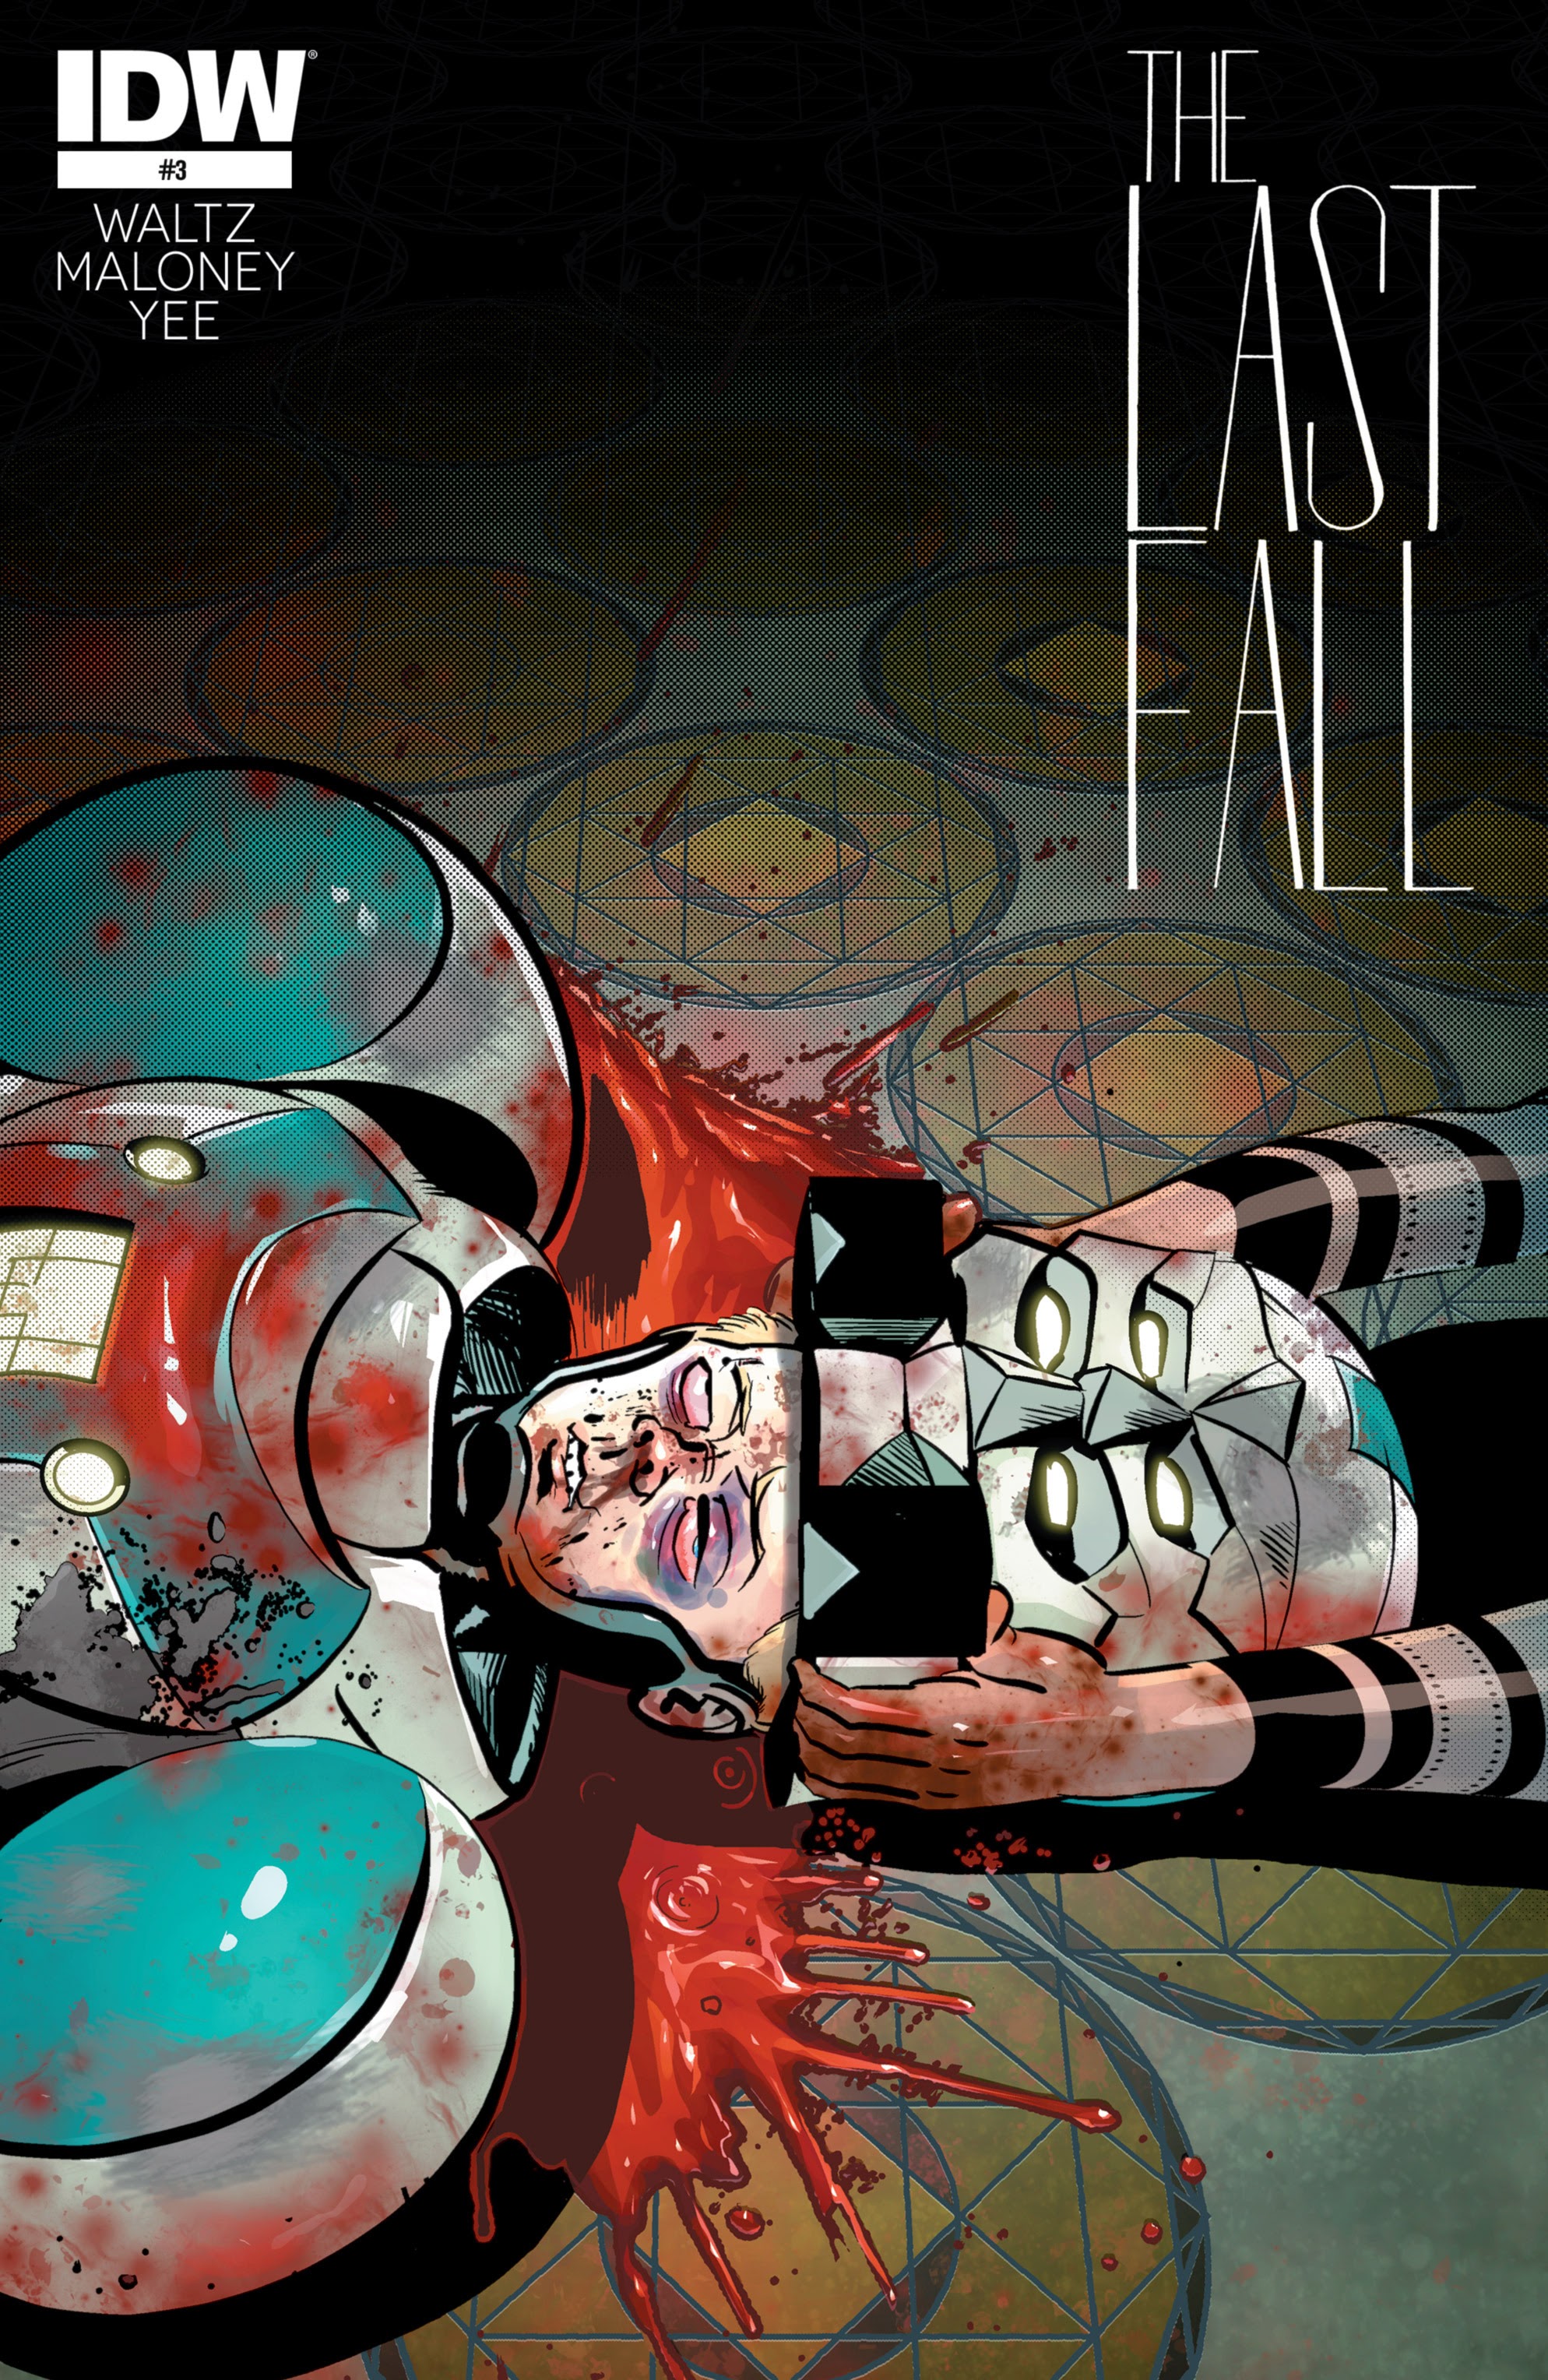 Read online The Last Fall comic -  Issue #3 - 1